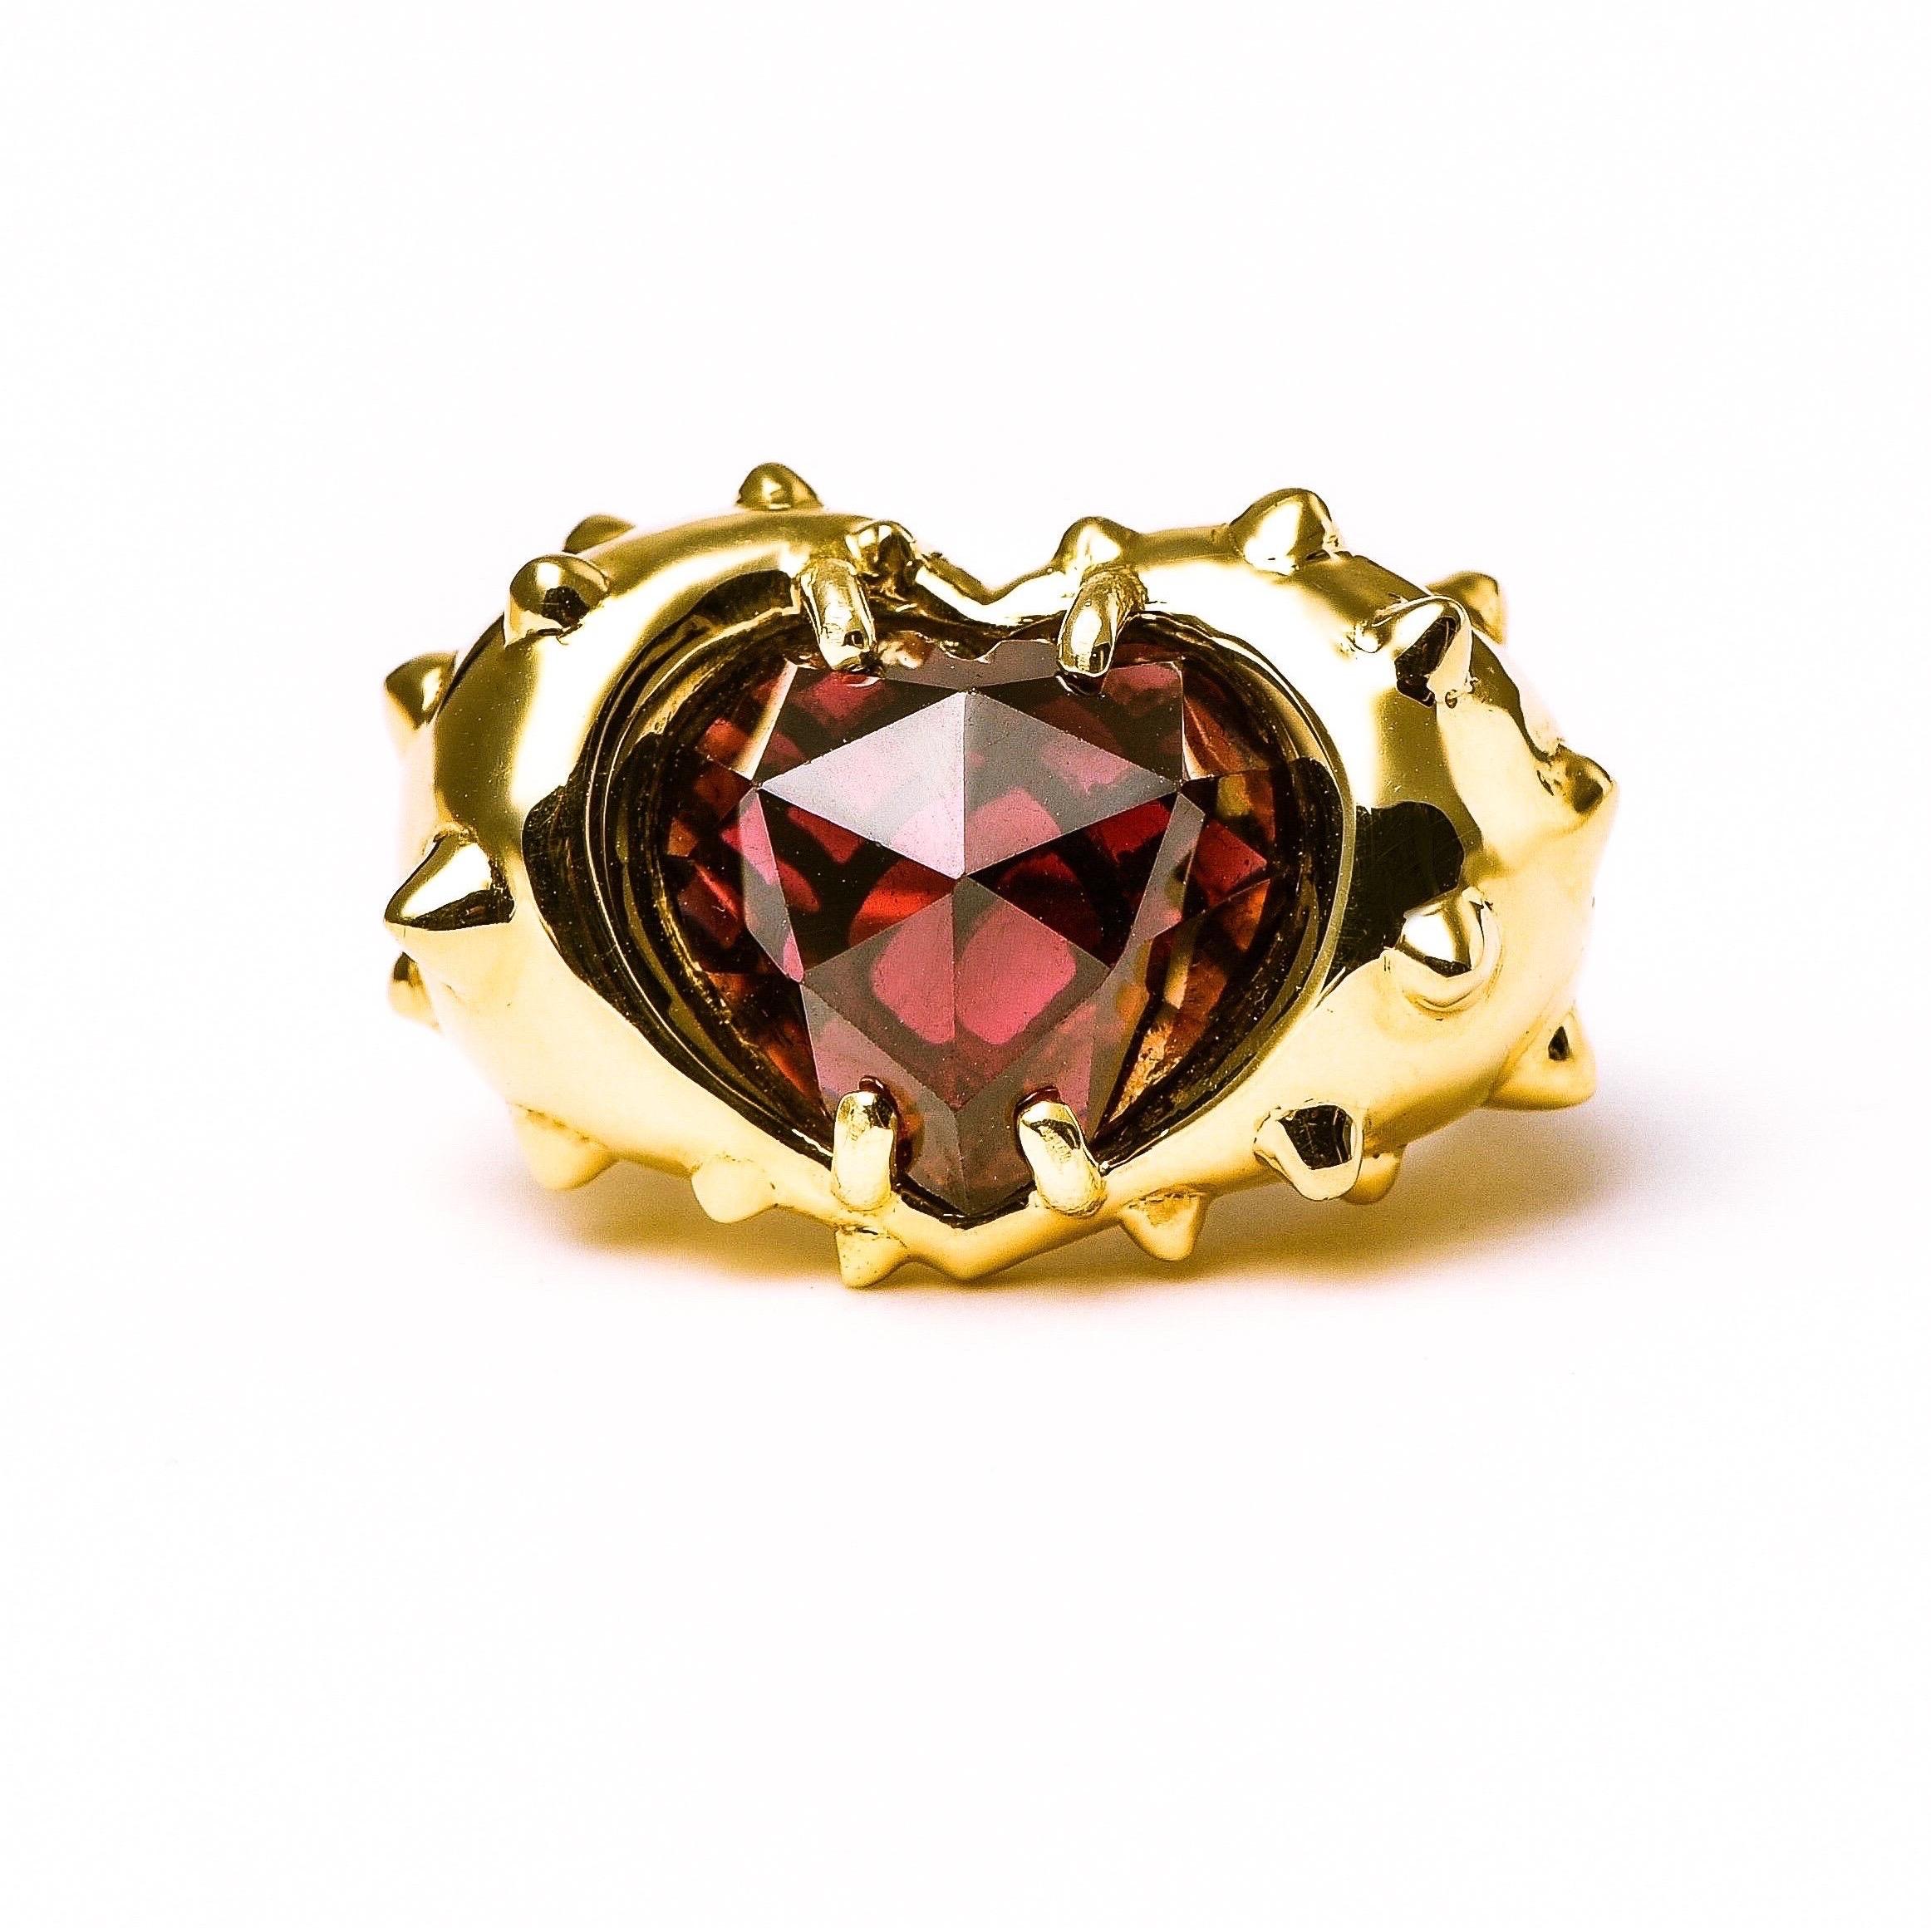 The ‘Spiked Heart’, ring is masterfully hand sculpted and crafted in 18K yellow gold, hallmarked in Cyprus. This impressive, statement ring comes in a highly polished finish and features an 11 Ct heart shaped, rose cut, wine Red Garnet. Red Garnet